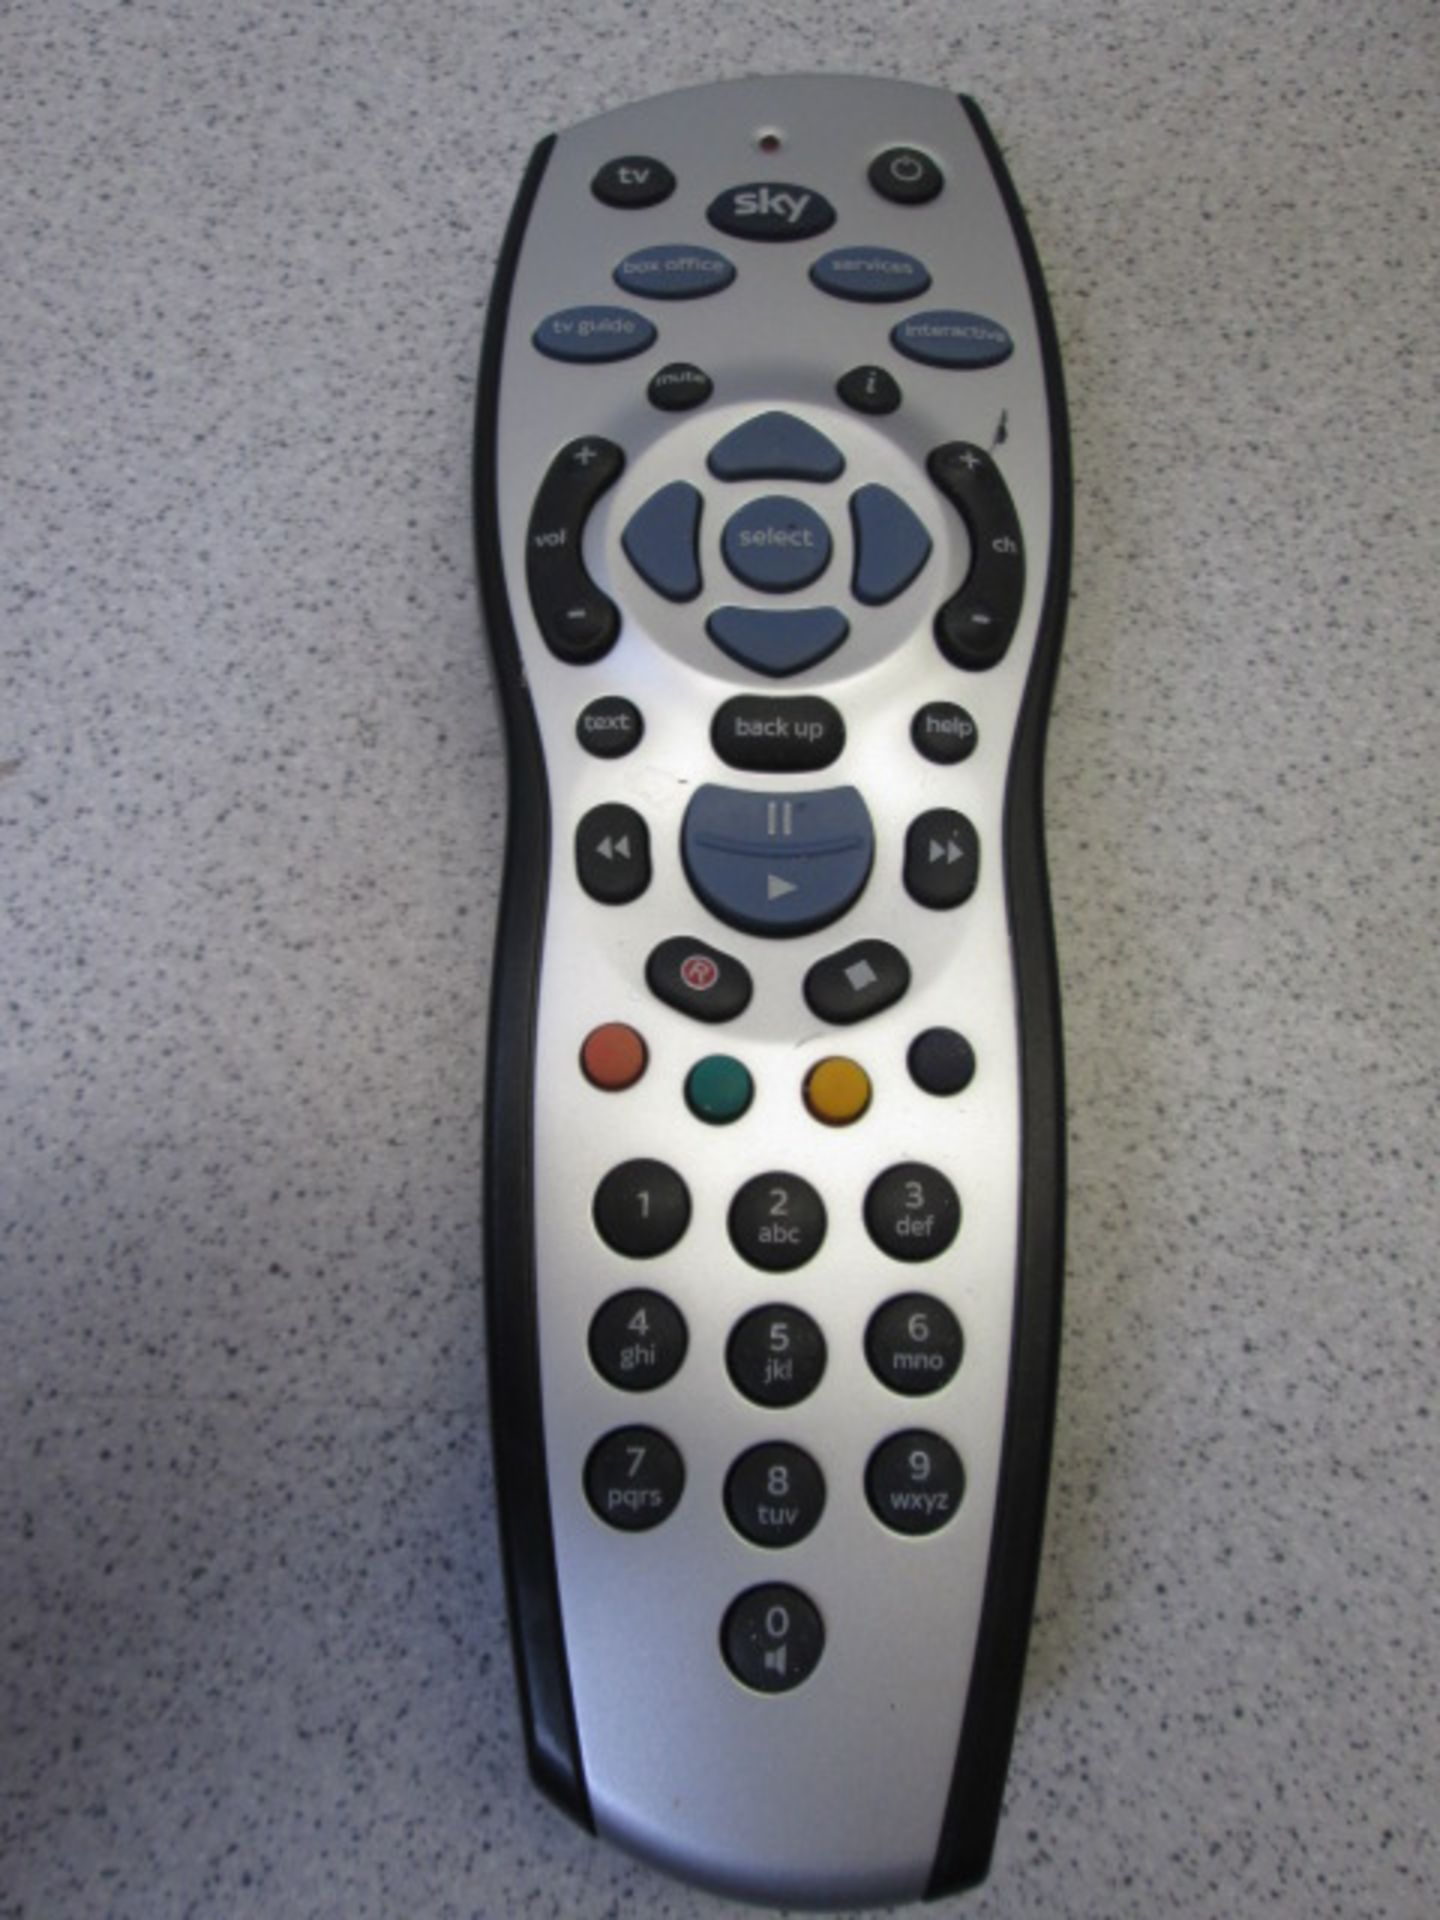 Sky HD Box, Model - DRX595 with Power Lead & Sky Remote - Image 3 of 3